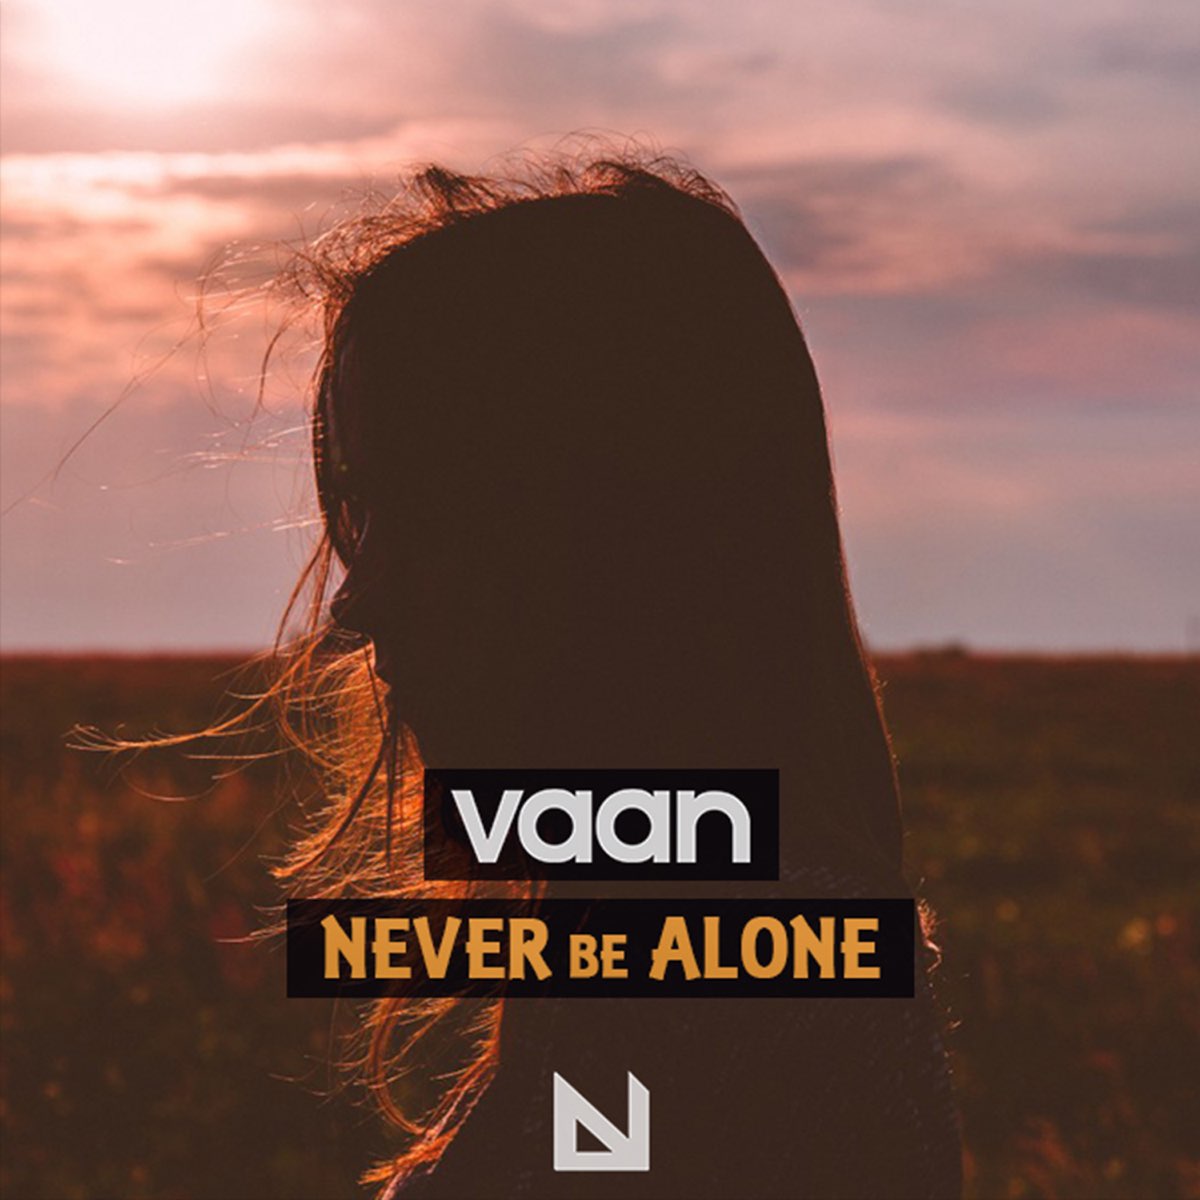 Never be Alone. Newer be alone